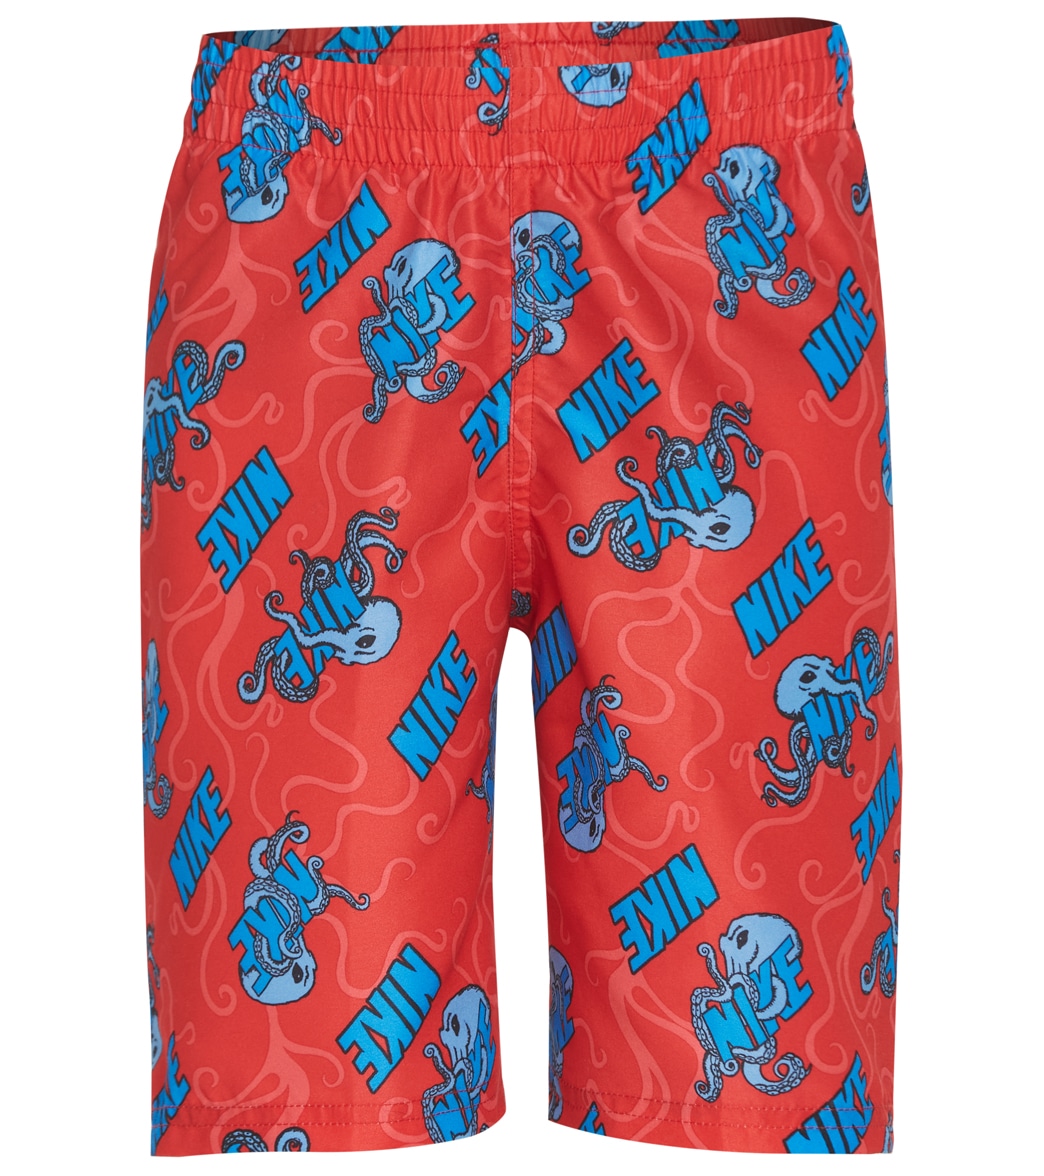 Nike Boys' Octologo Packable 8 Volley Short Big Kid - University Red Large Polyester - Swimoutlet.com